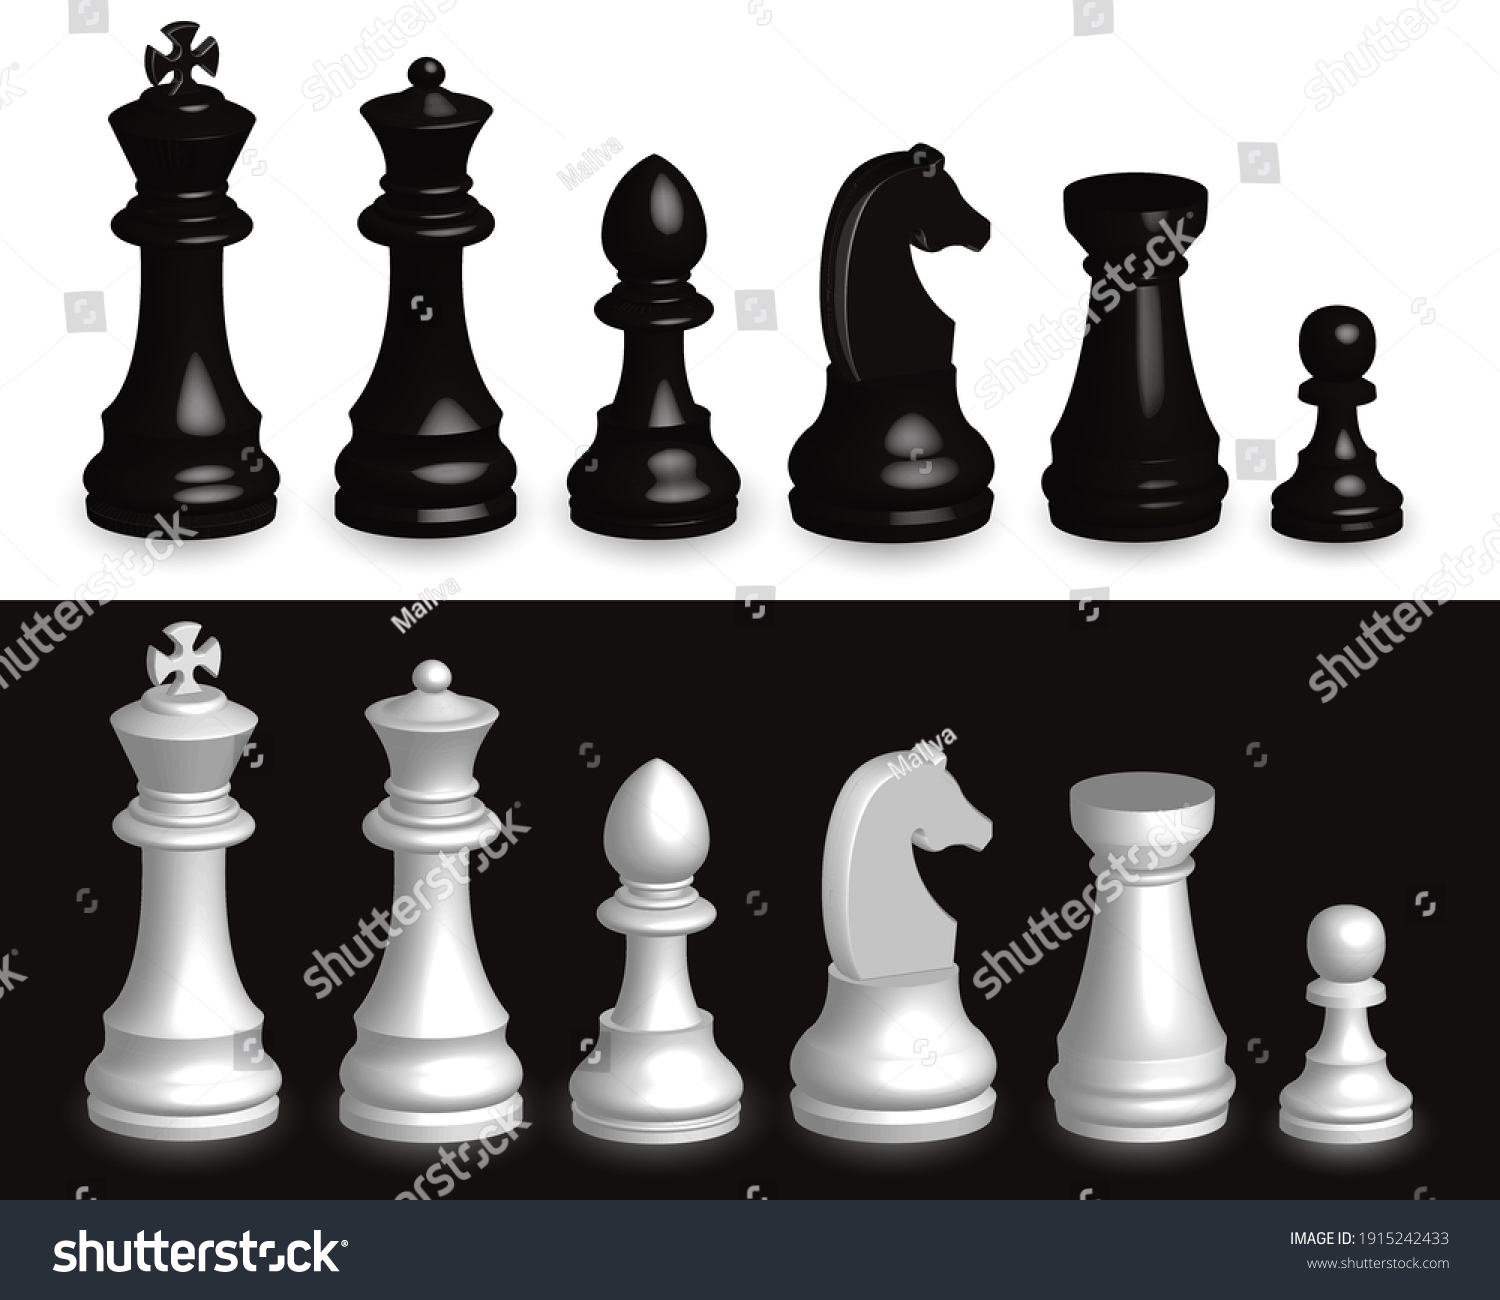 SVG of Set of chess pieces 3d. Realistic set of all chess pieces in 3d black and white. svg